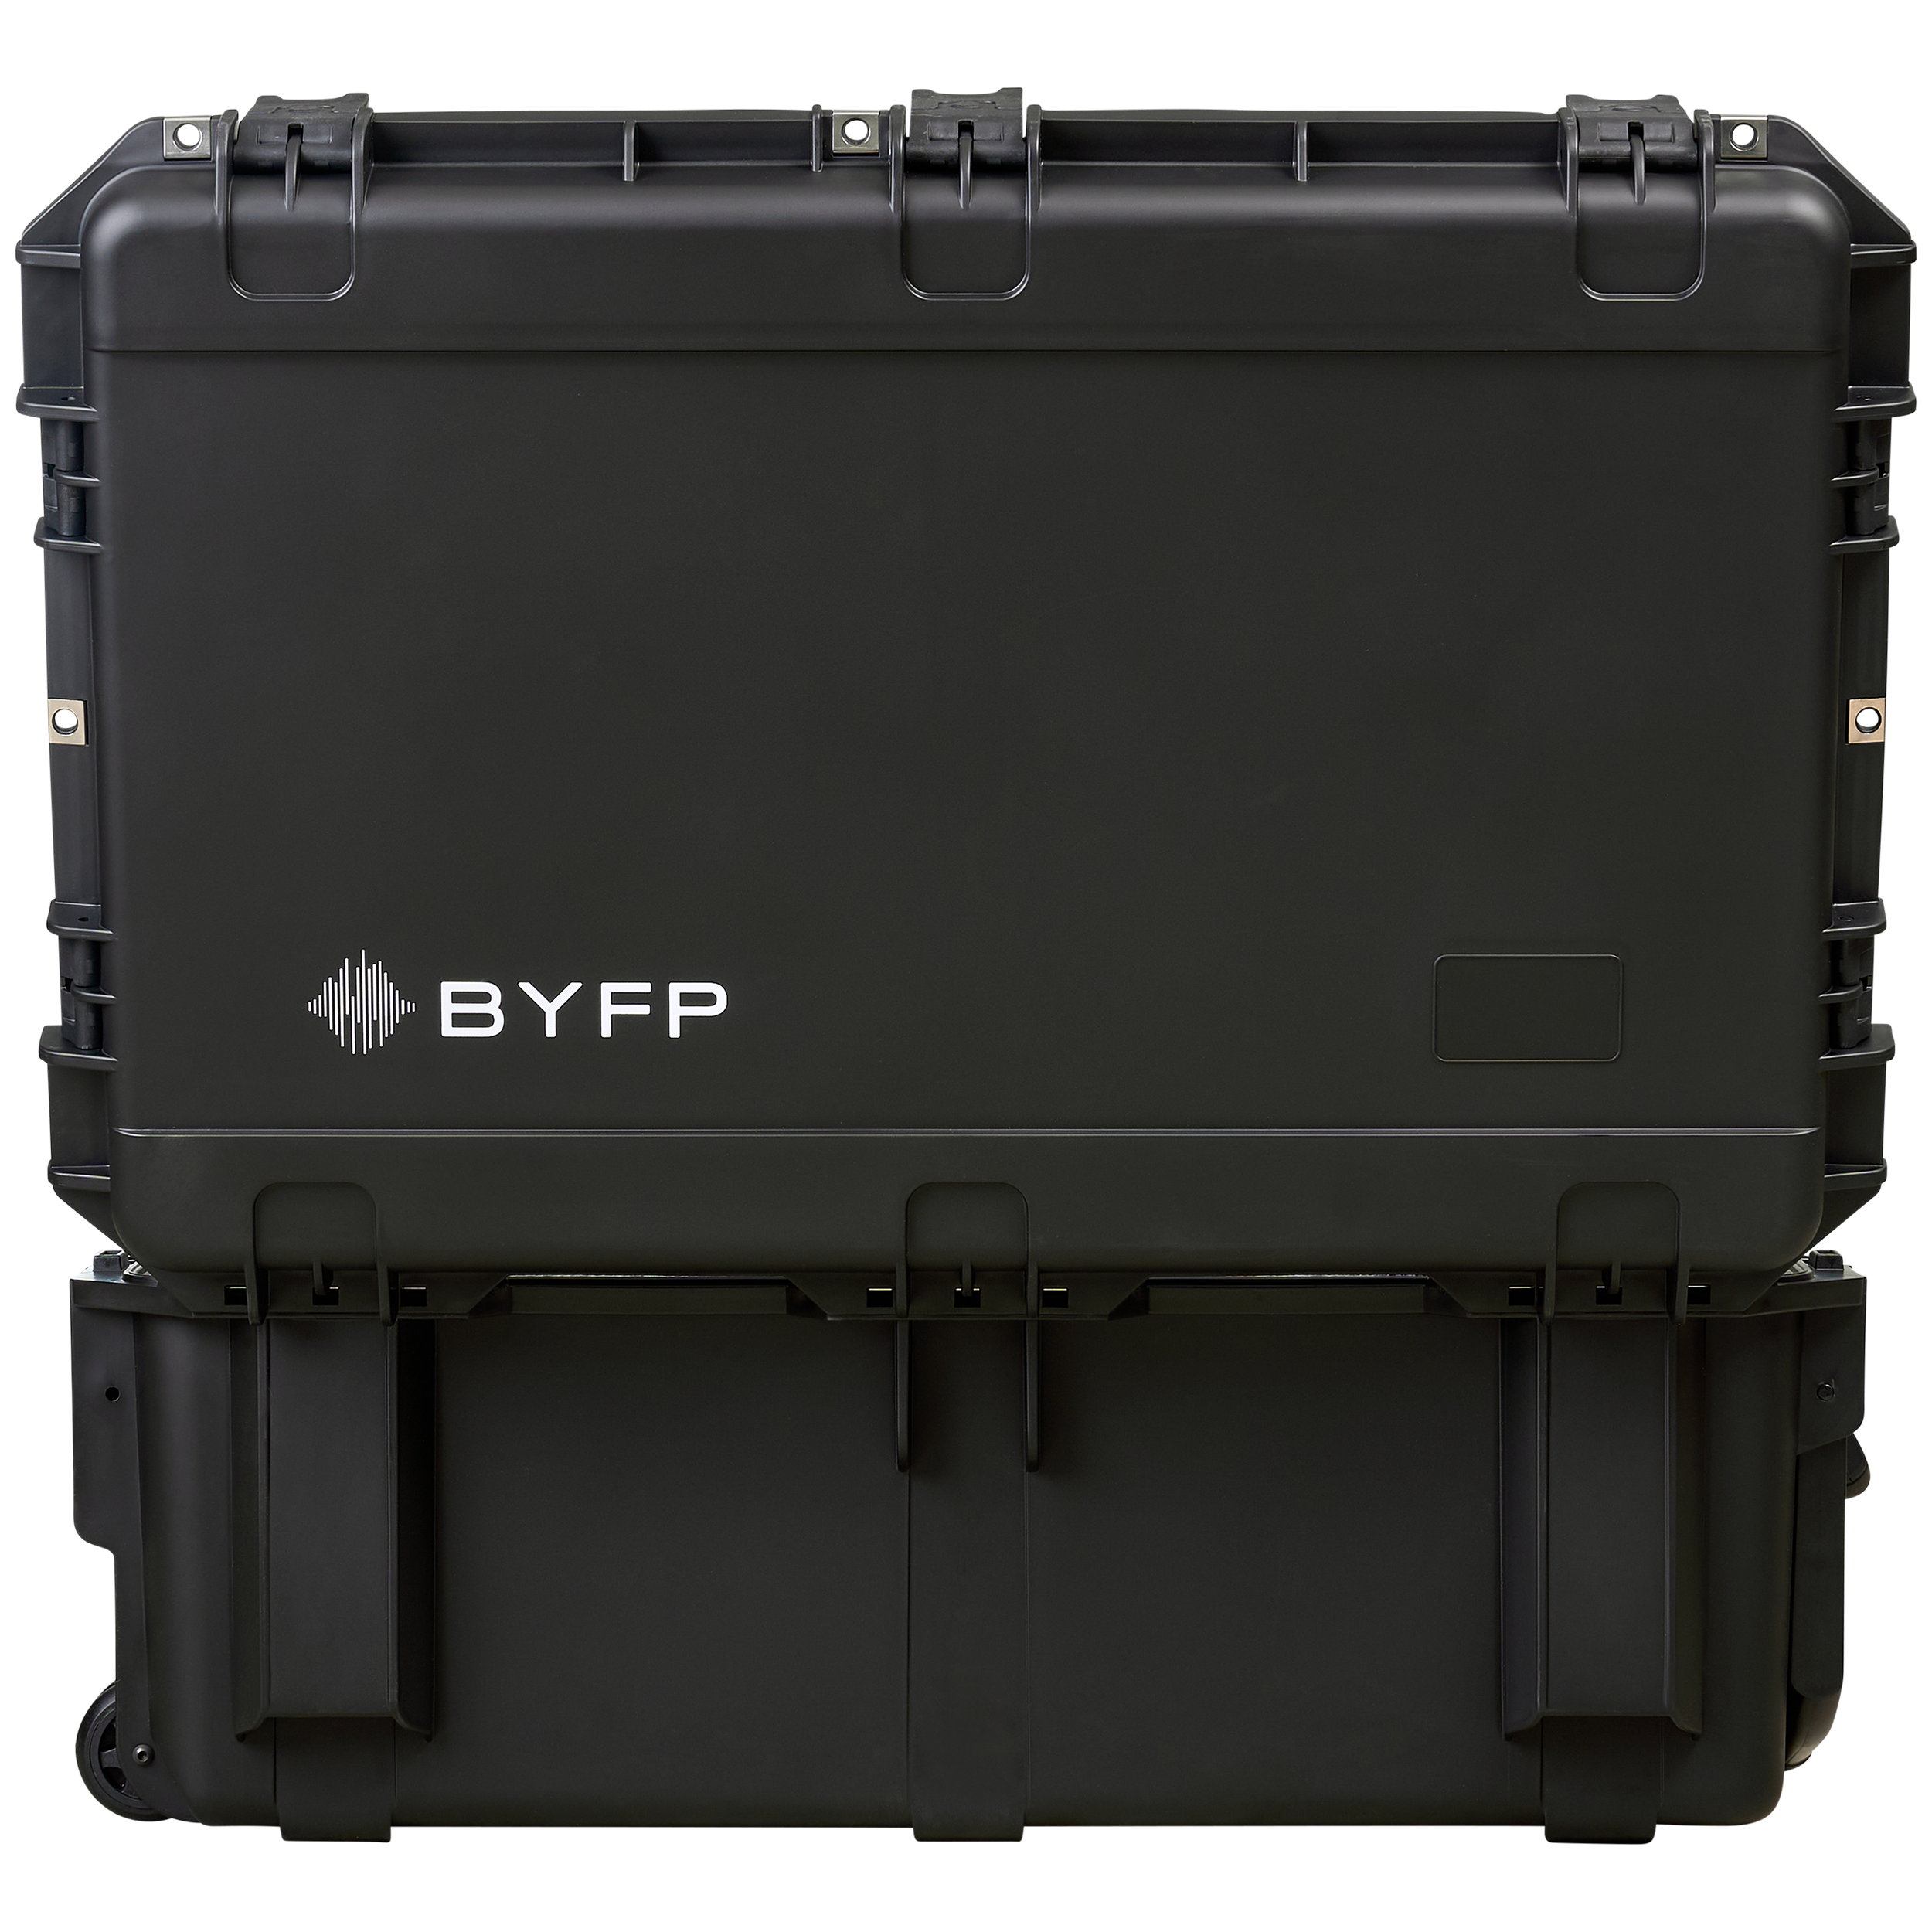 RCF TT808 tourPack with BYFP ipCase